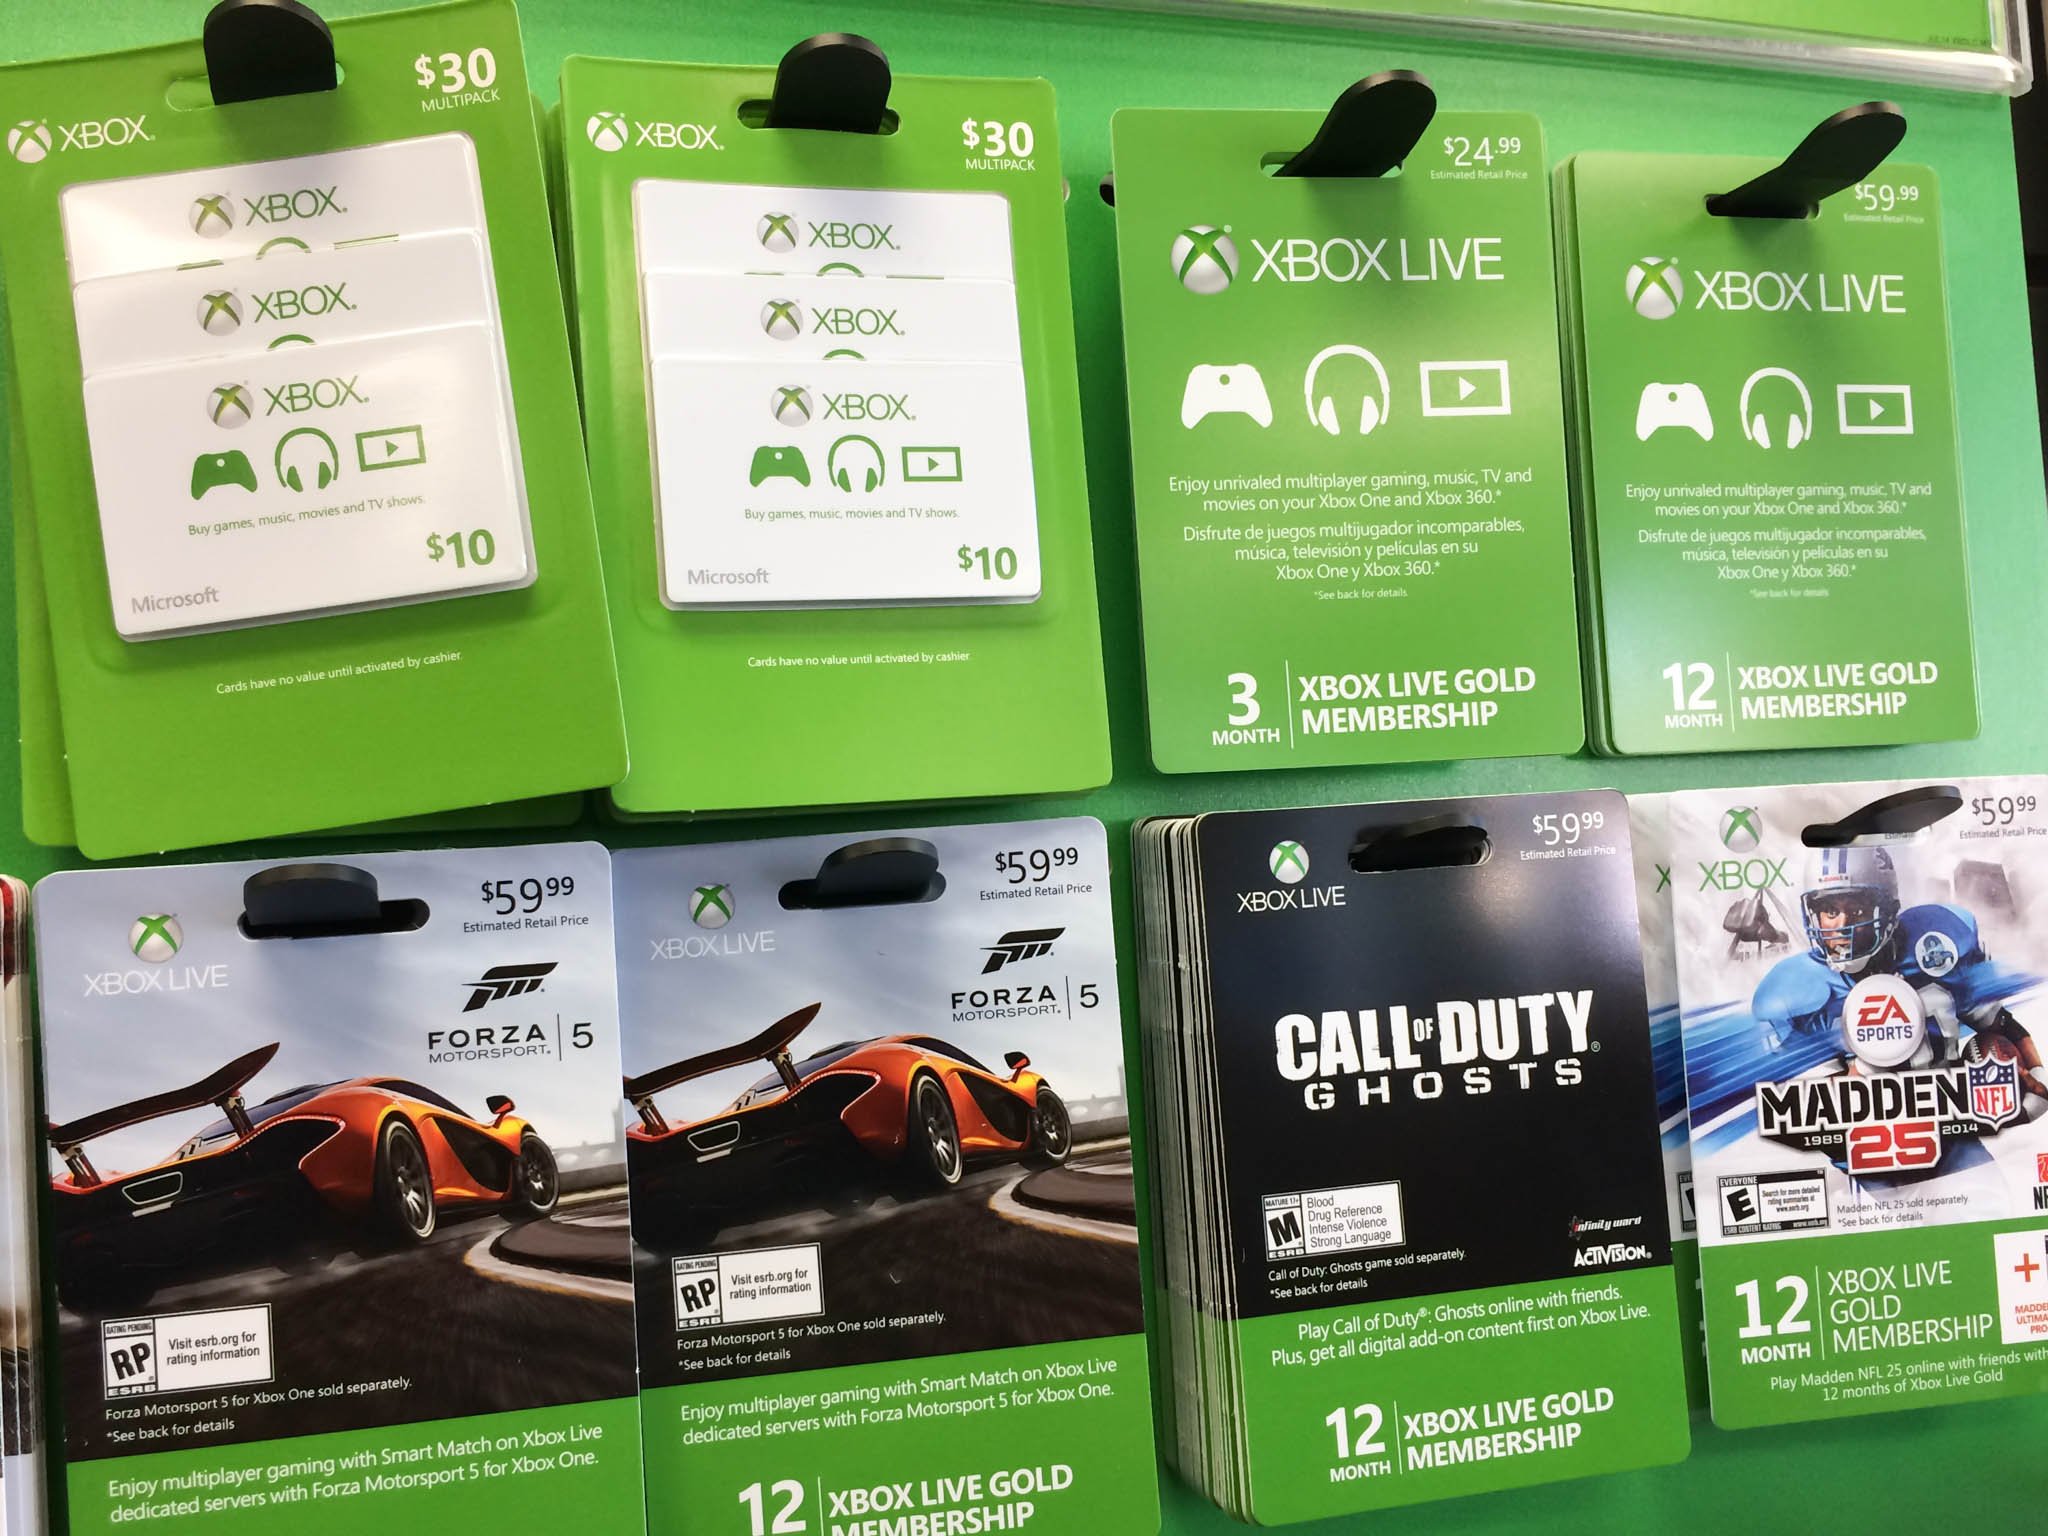 How to redeem Xbox One codes and gift cards | Windows Central